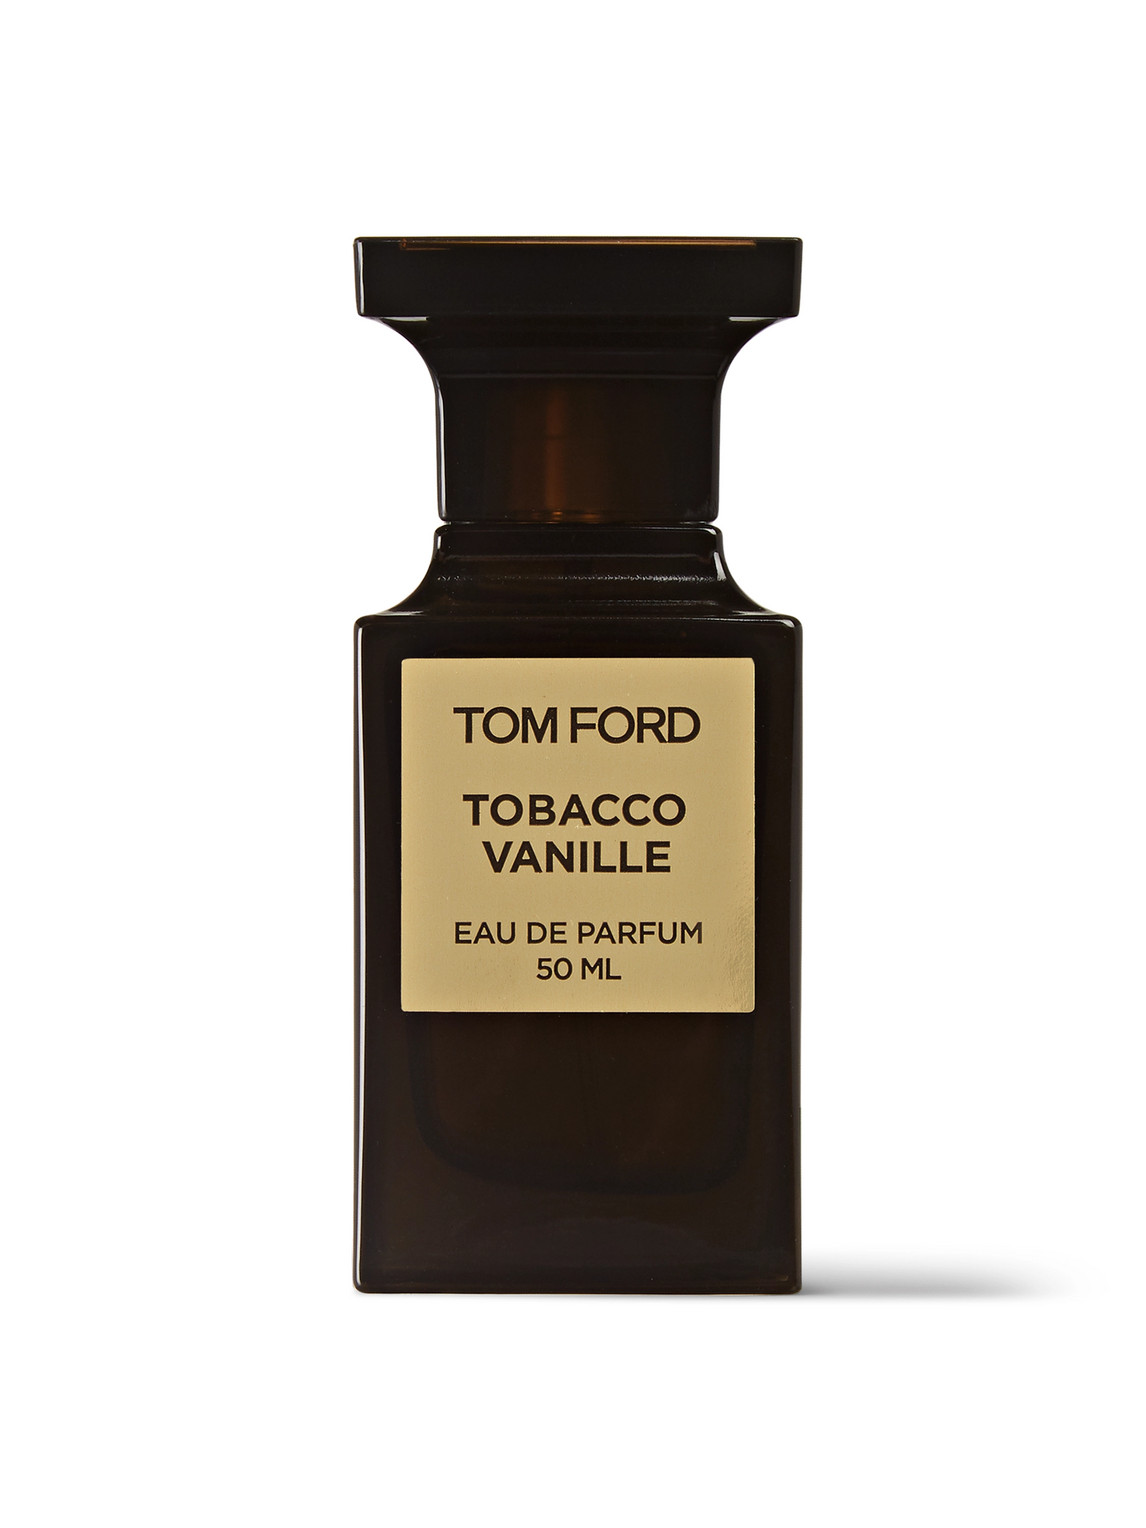 Tom Ford Private Blend Tobacco Vanille Eau De Parfum, 50ml In Colorless